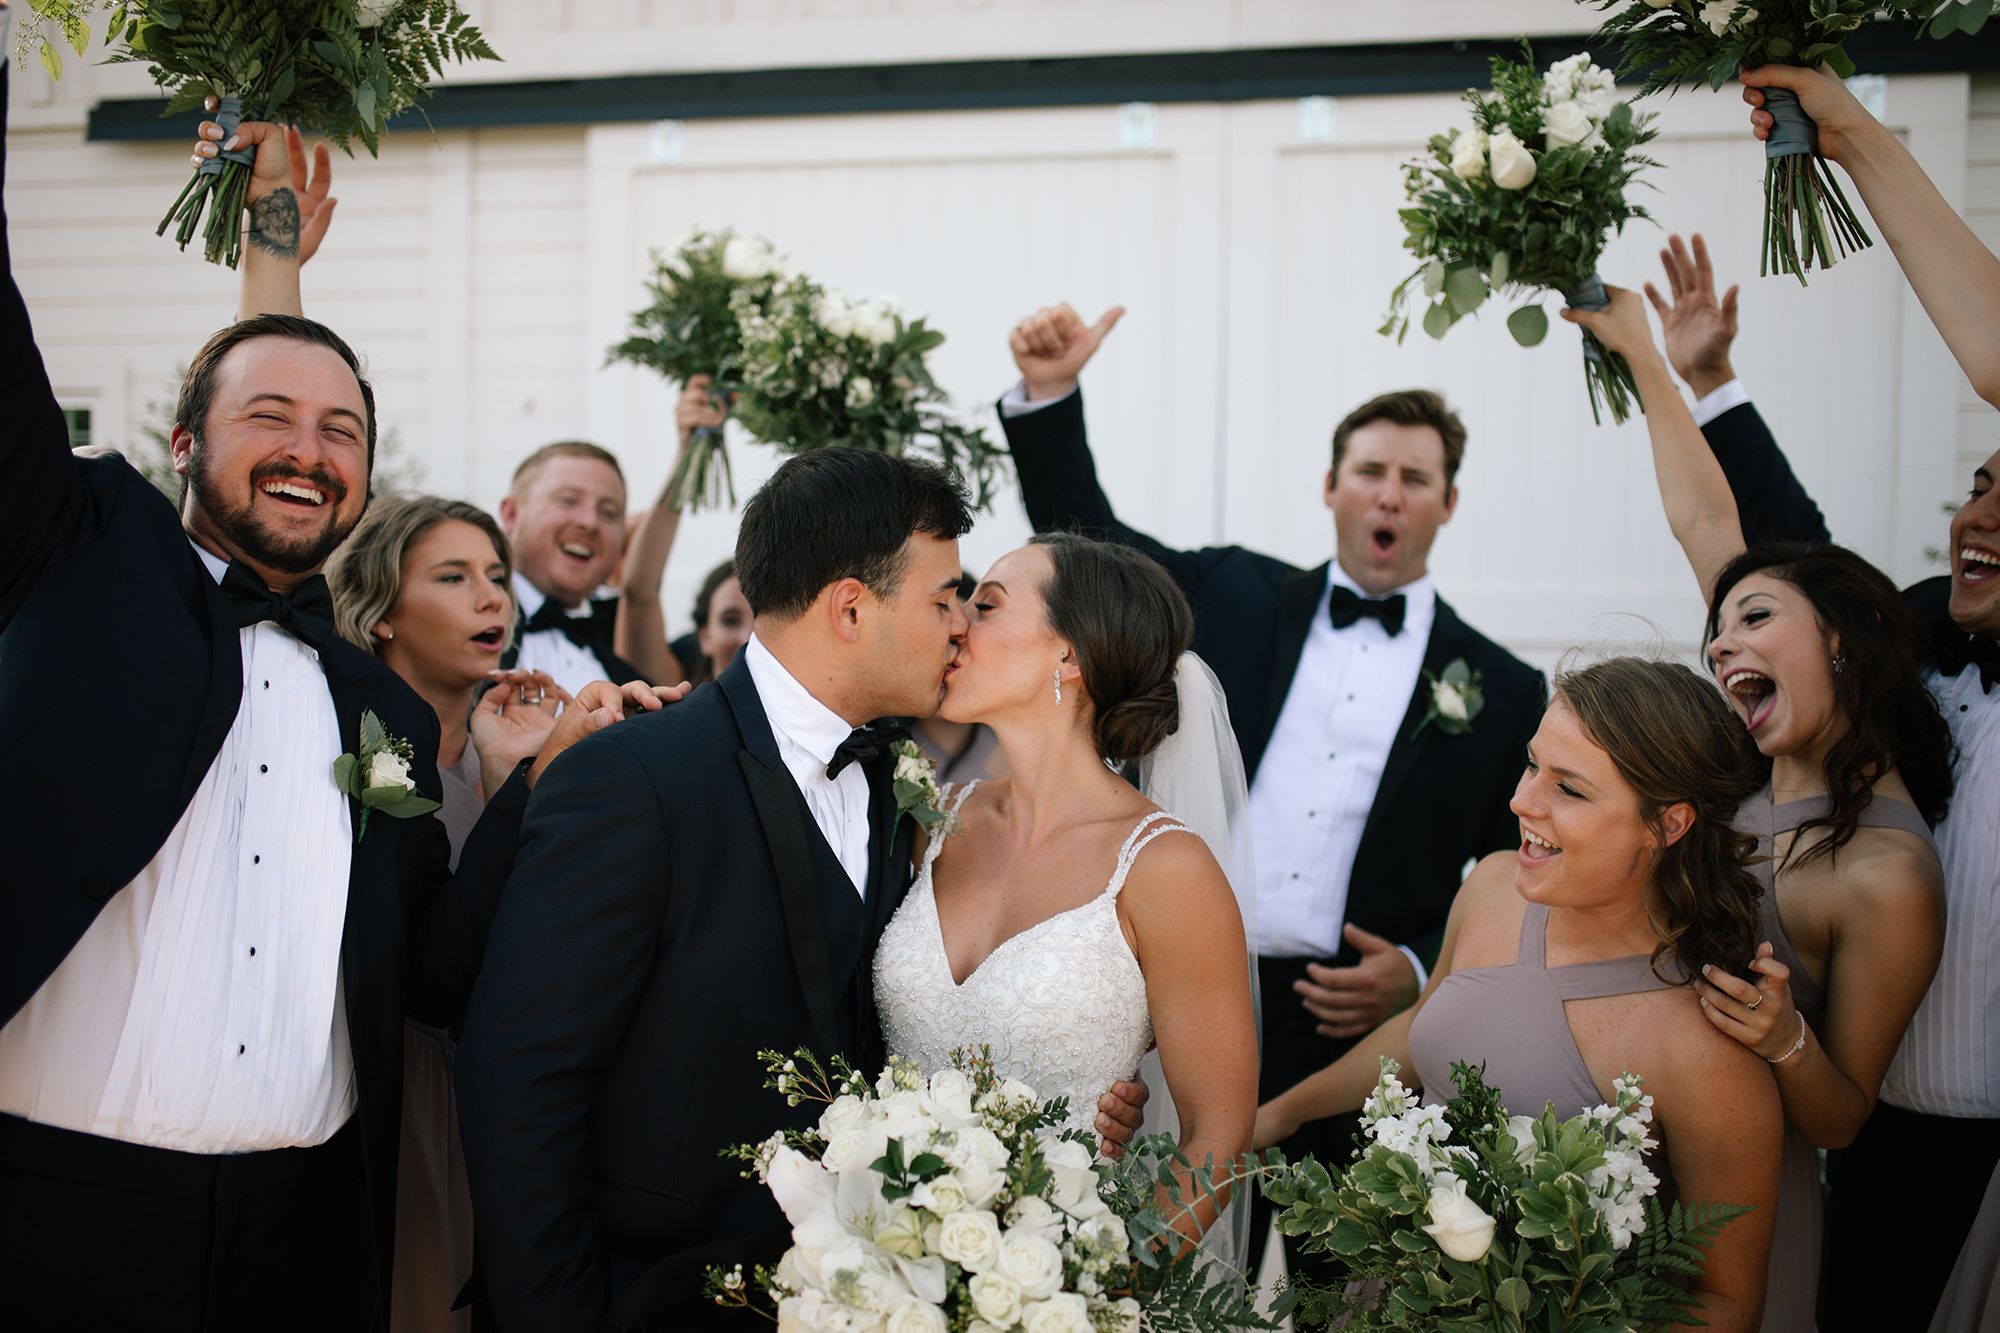 photo of groom in a black tuxedo and bride kissing during a wedding ceremony